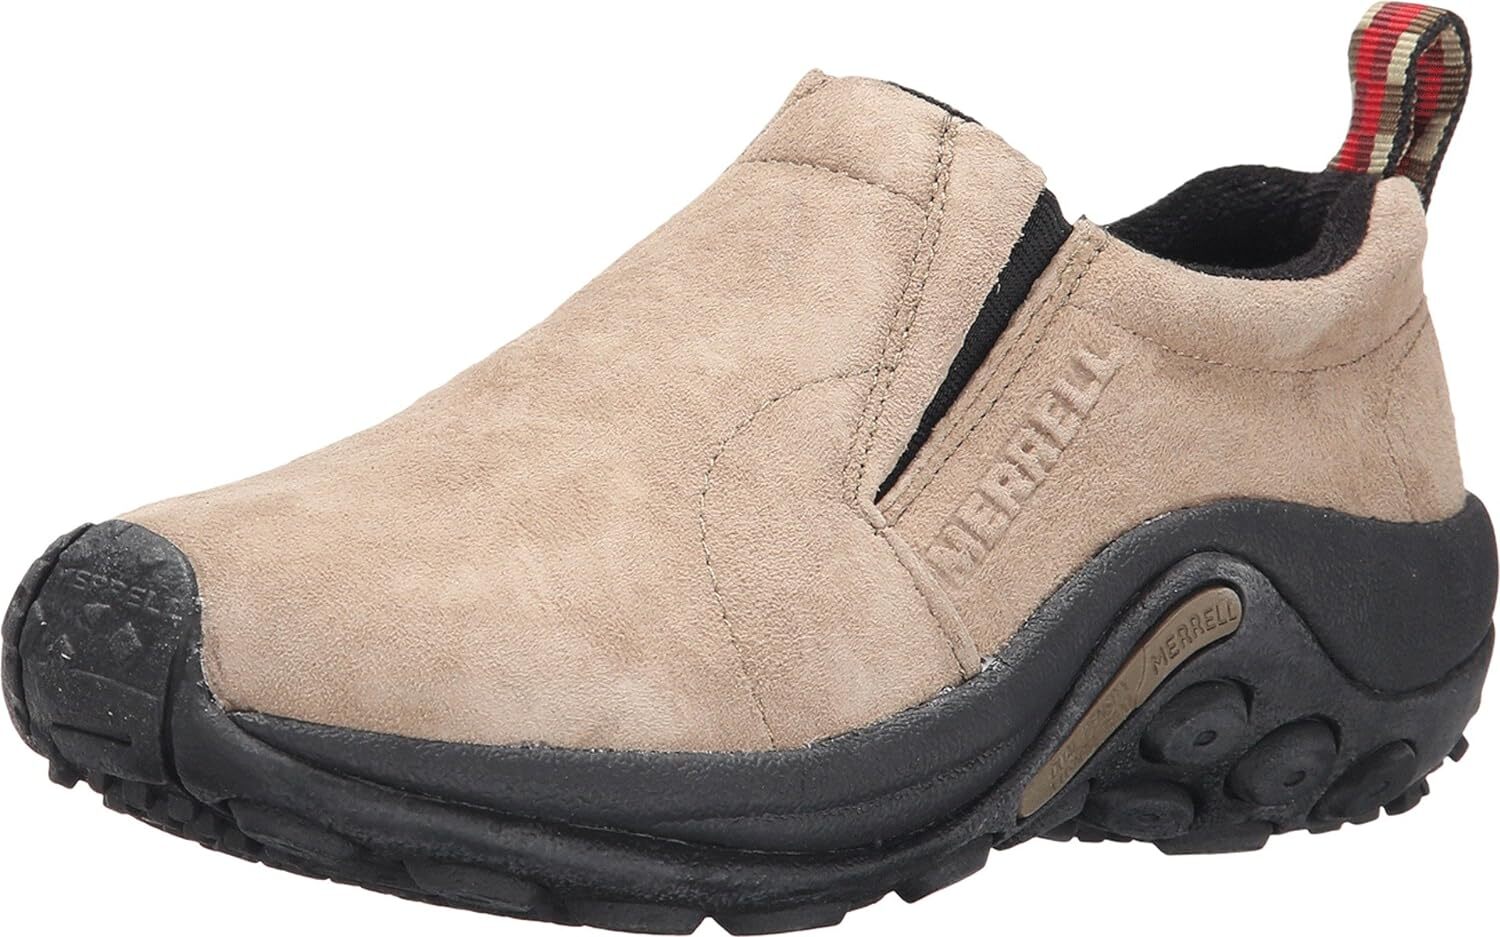 Merrell shoe with a slip-on design and black sole